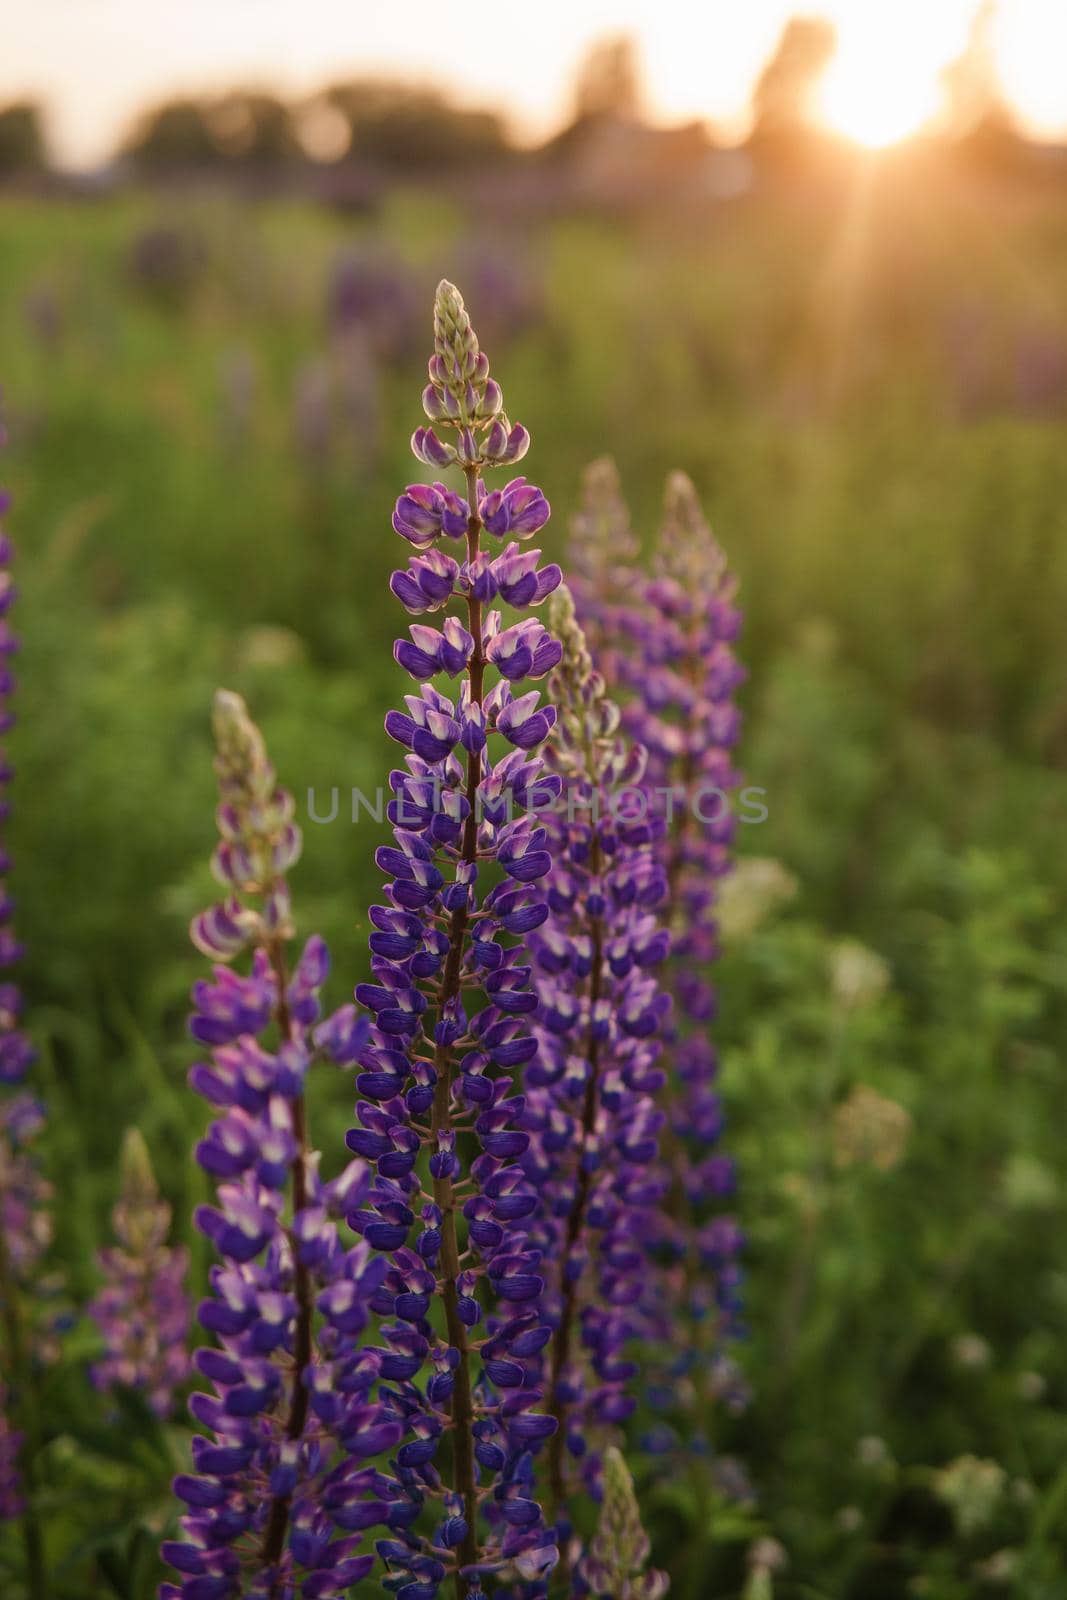 photos of lupine flowers in nature by Annu1tochka